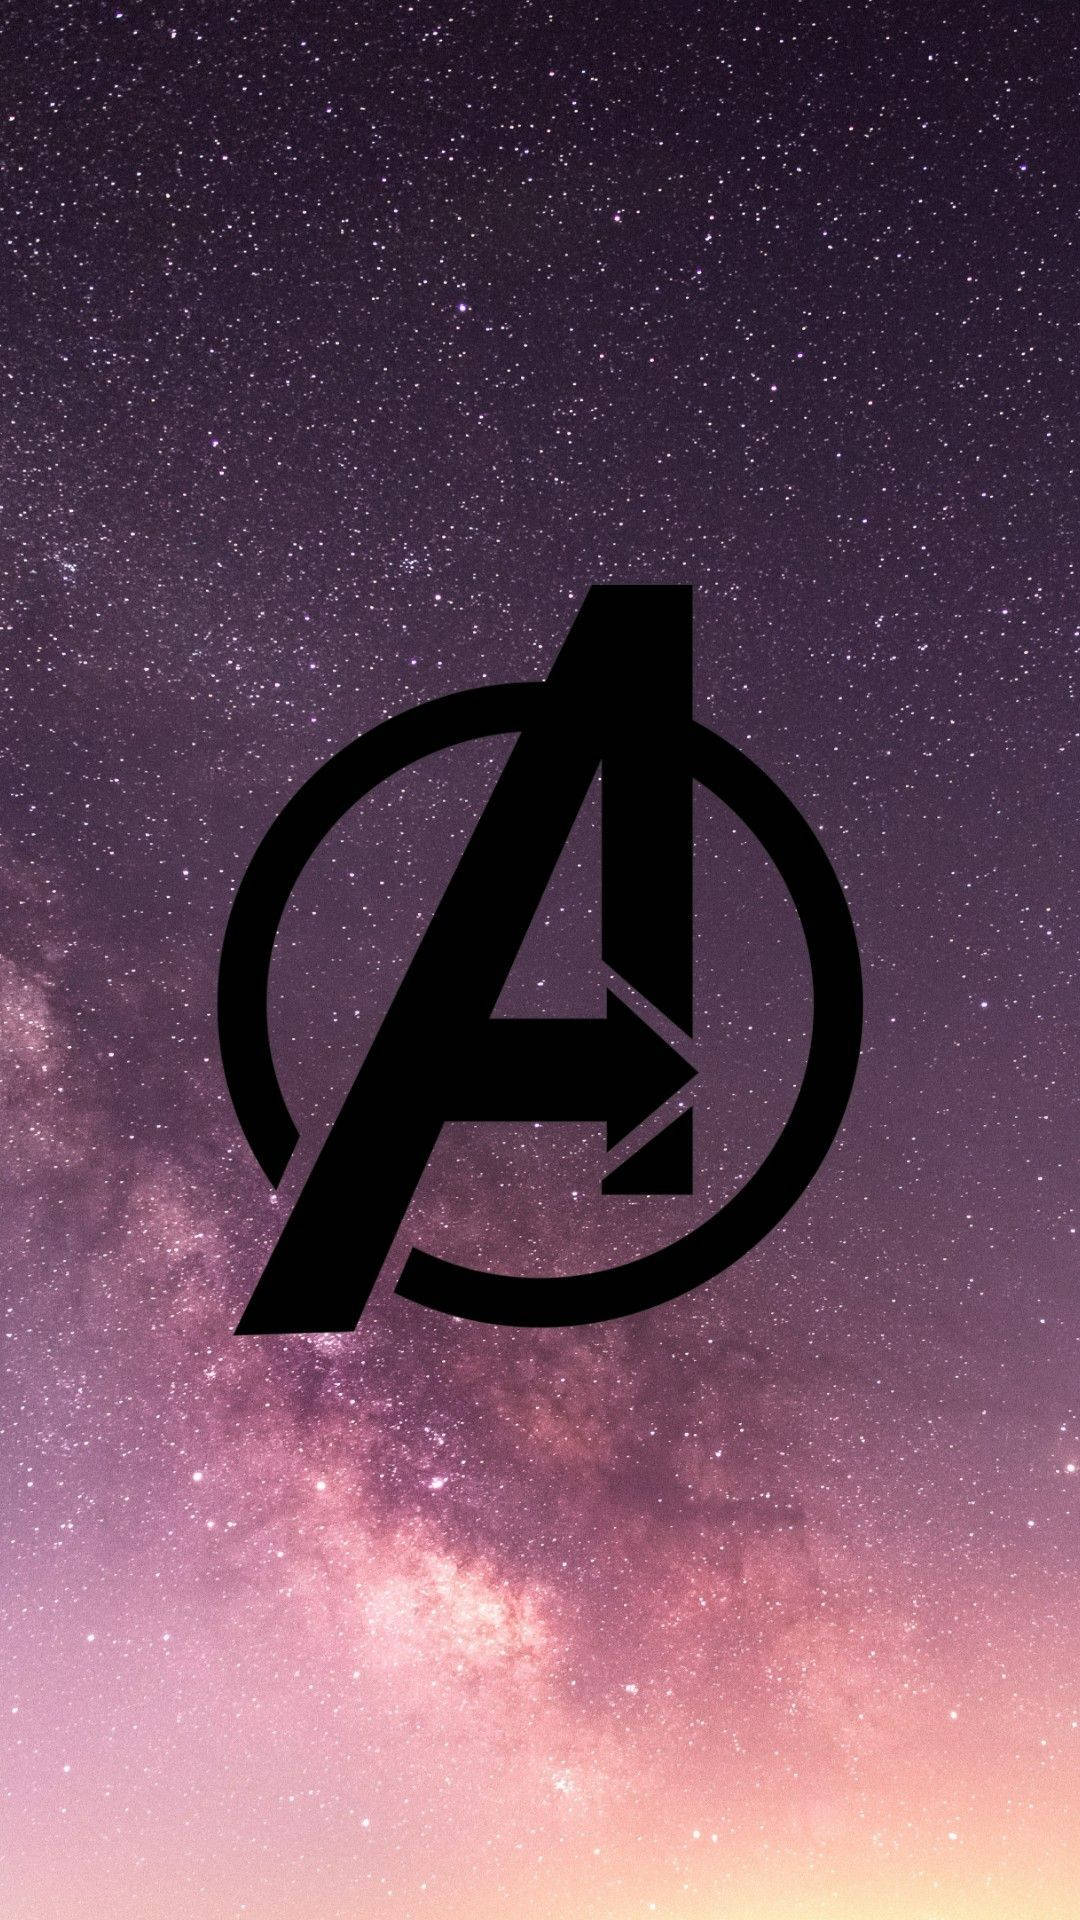 Avengers Logo In Galaxy Background